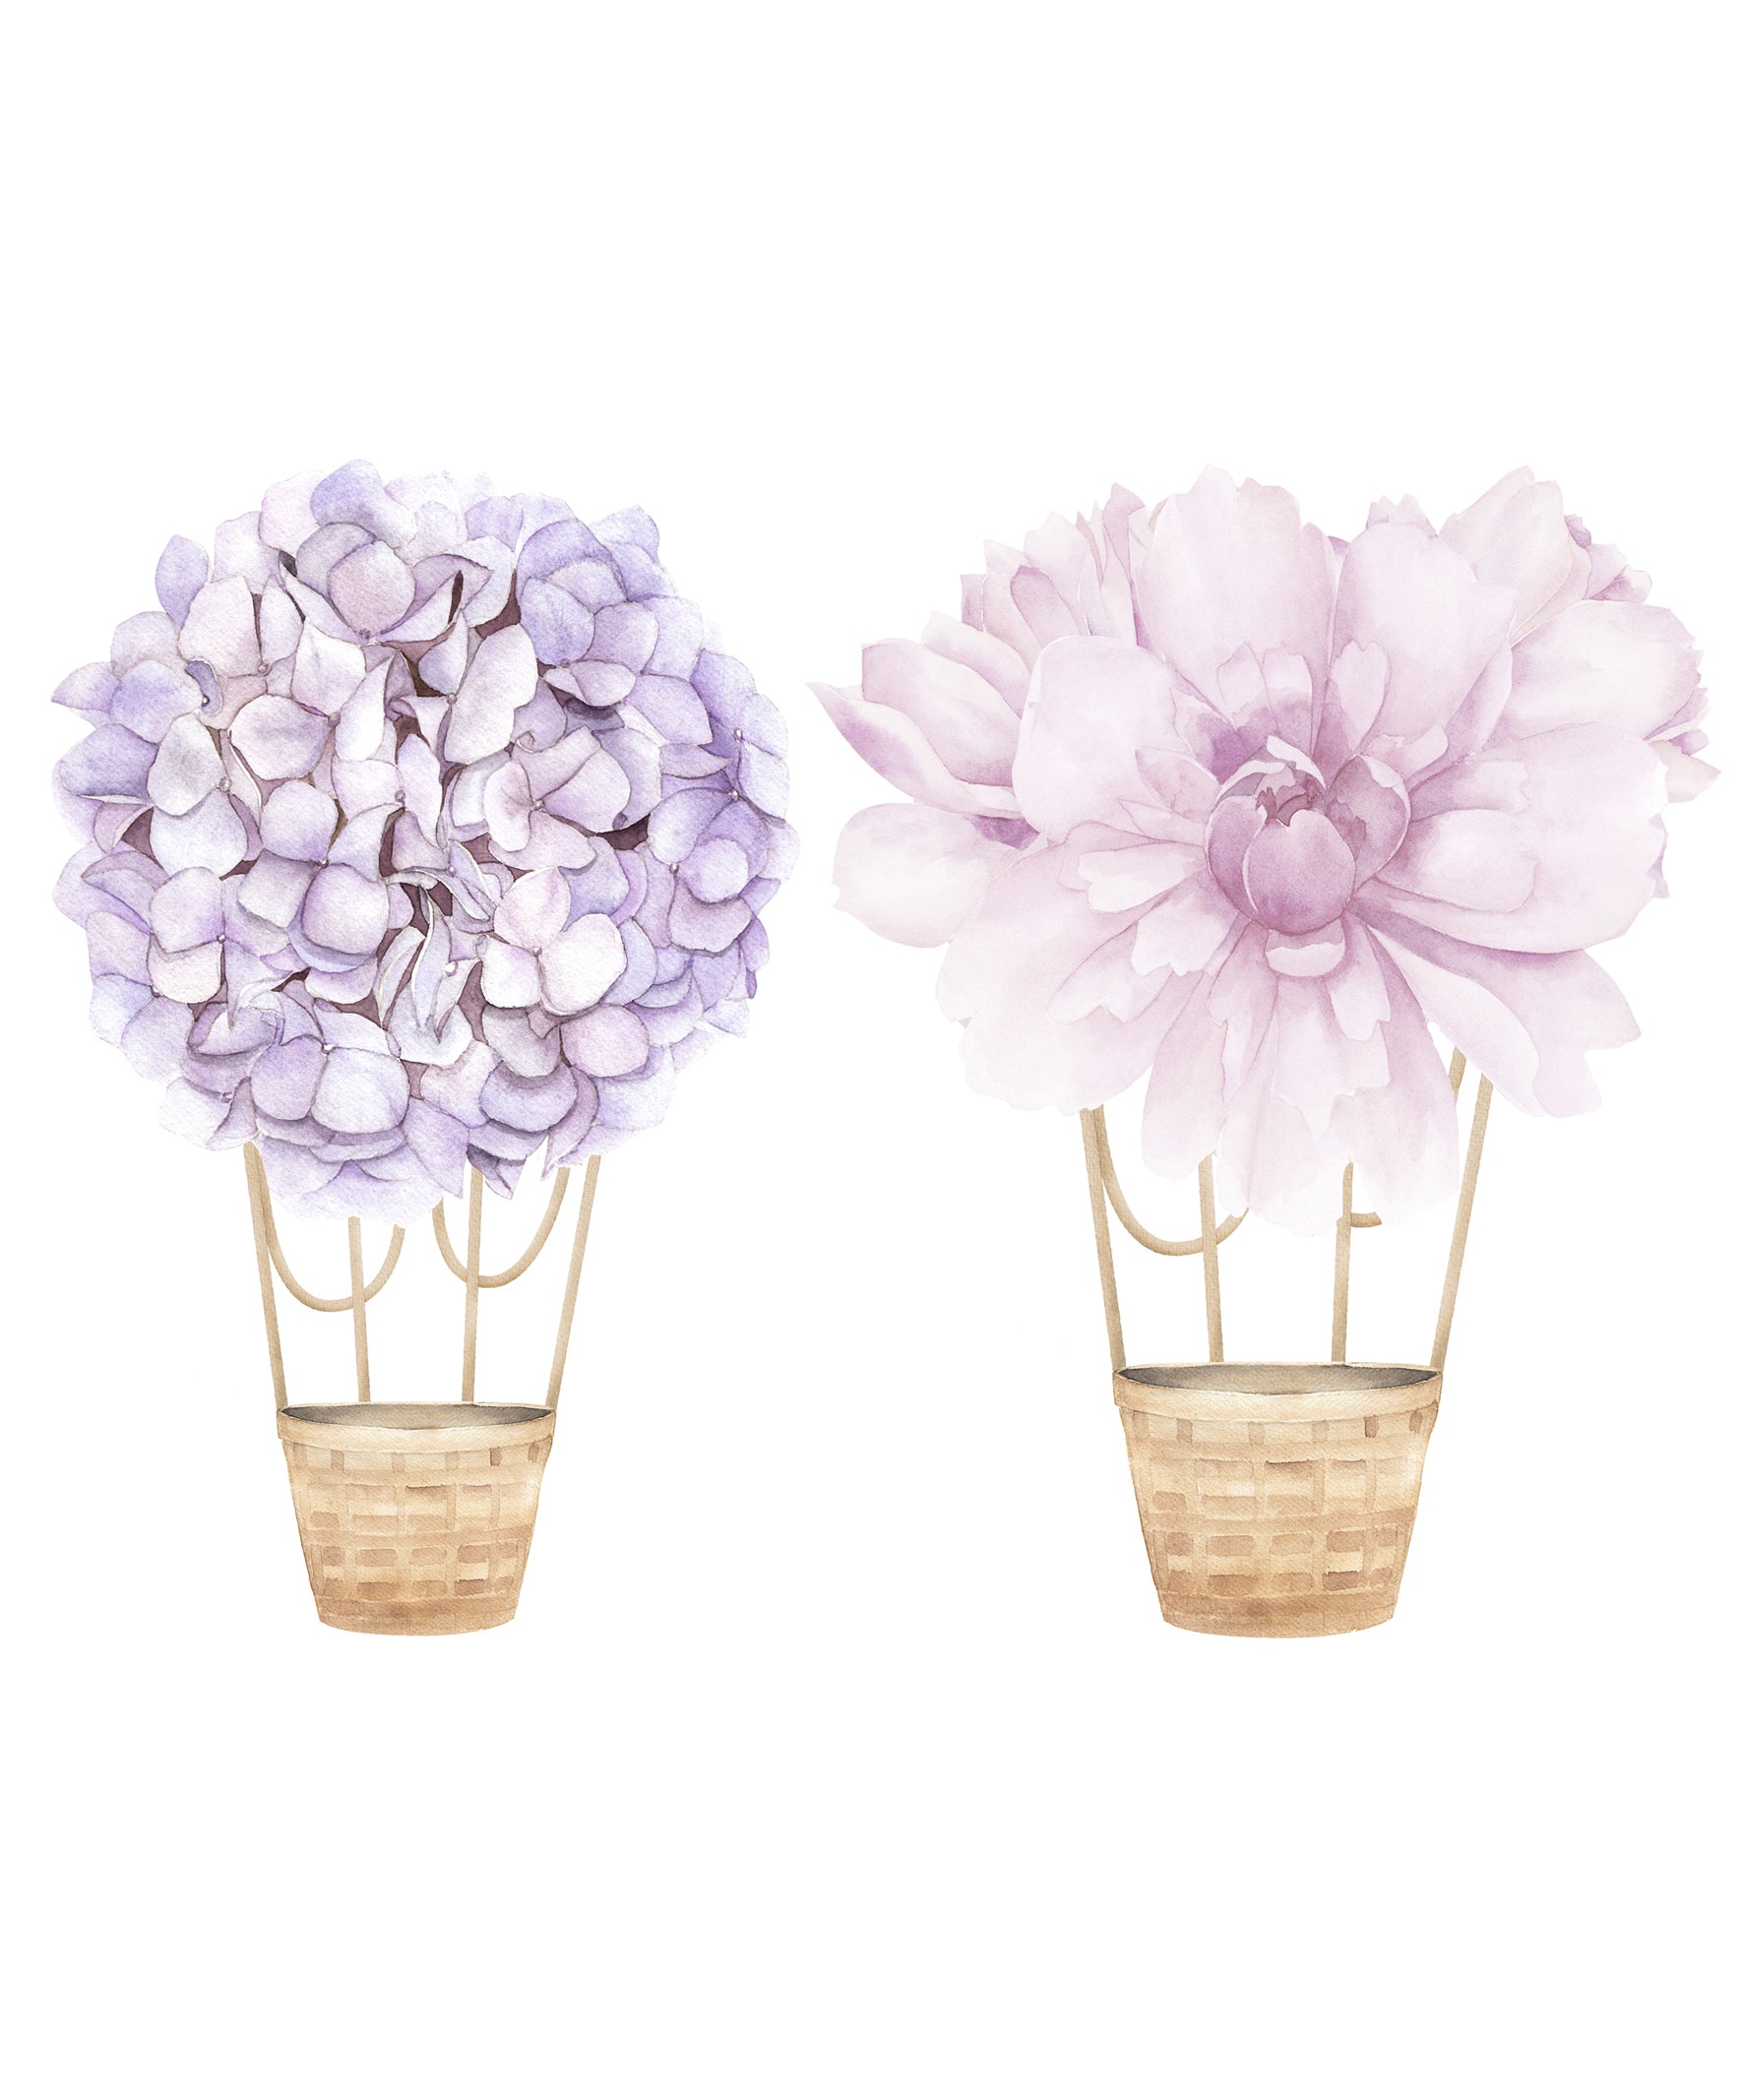 Floral Hot Air Balloons (Purple) - Wall Decals - Fable and Fawn 